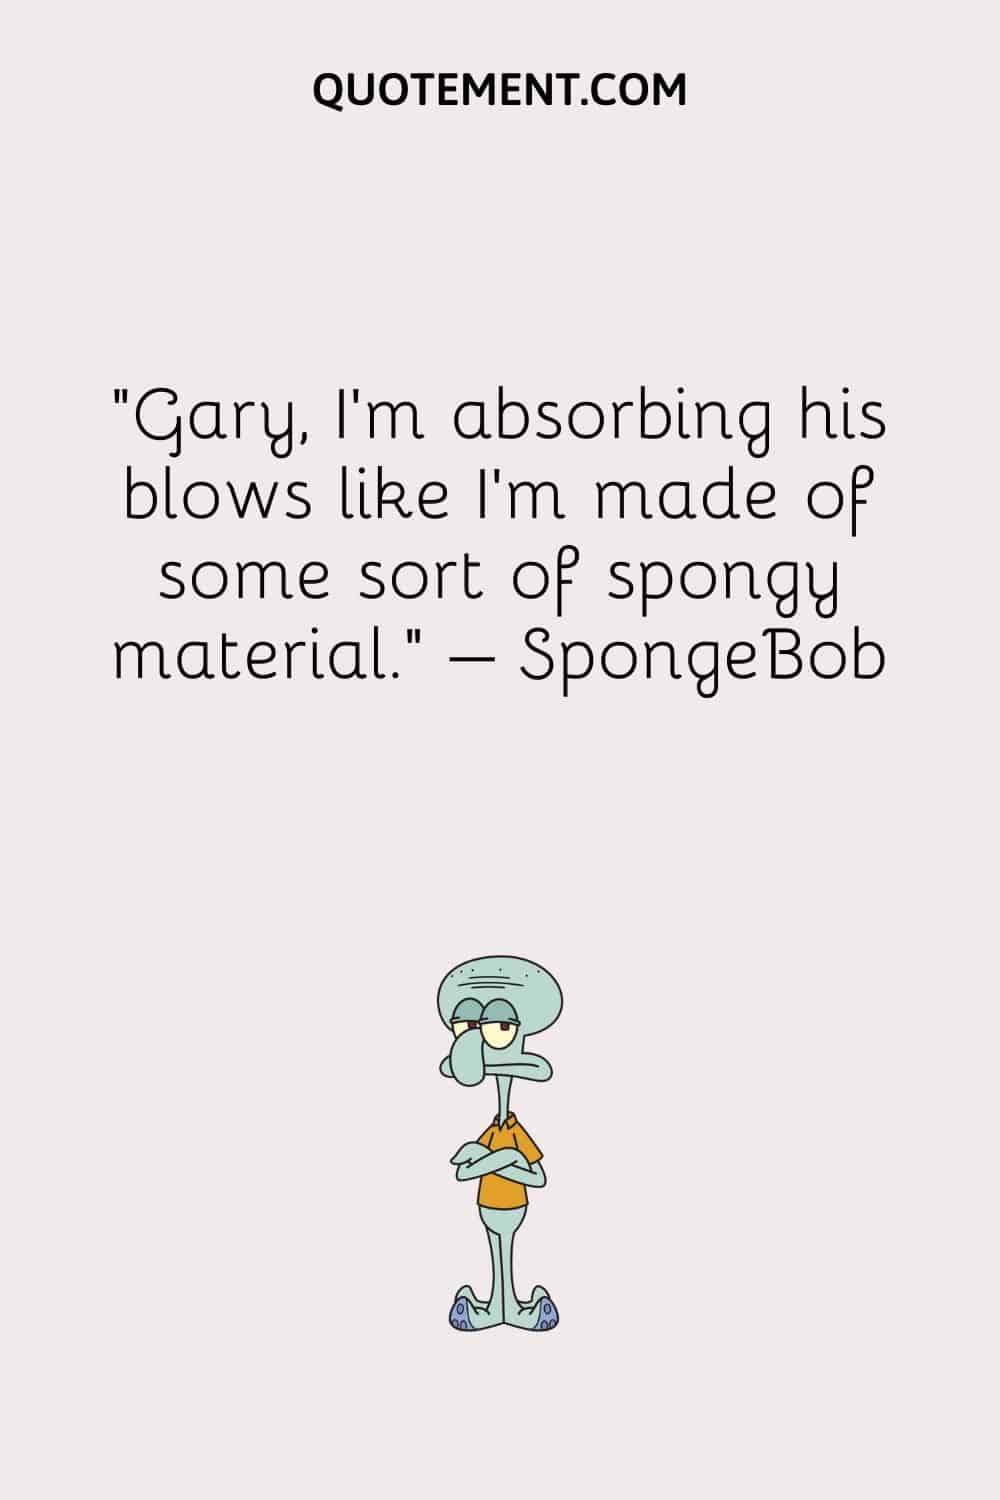 “Gary, I’m absorbing his blows like I’m made of some sort of spongy material.” – SpongeBob
